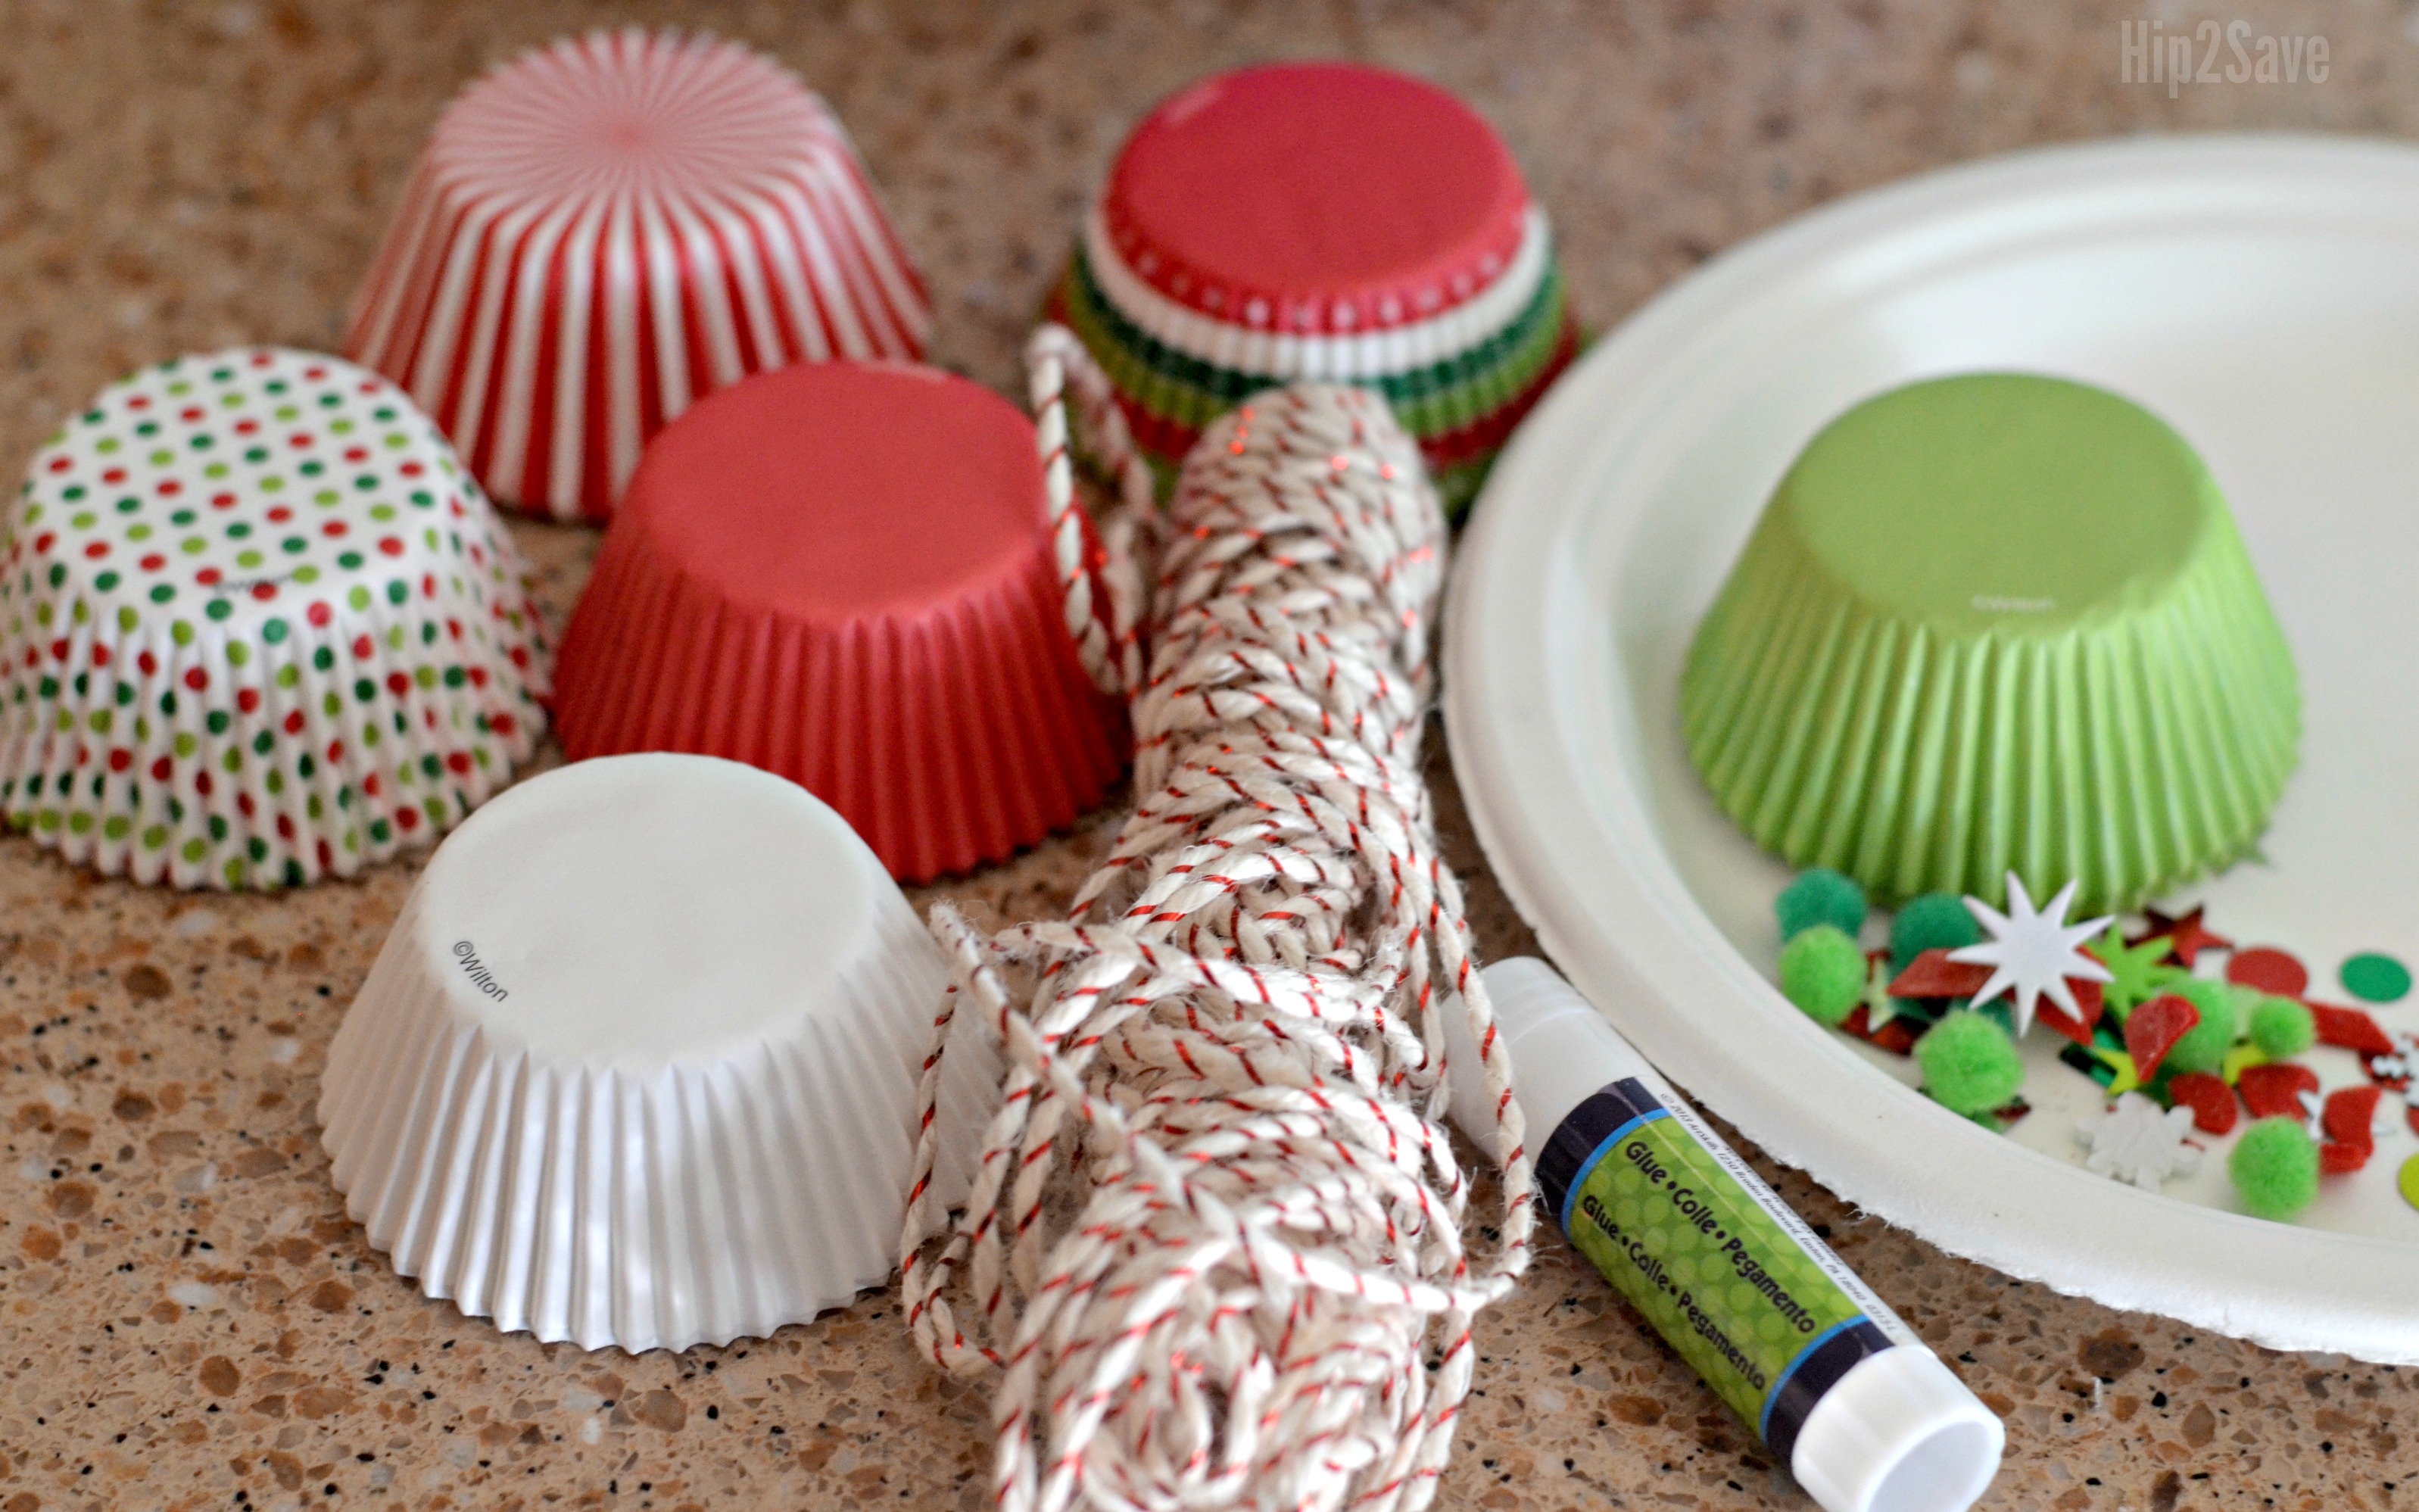 cupcake-liner-christmas-ornaments-easy-kids-craft